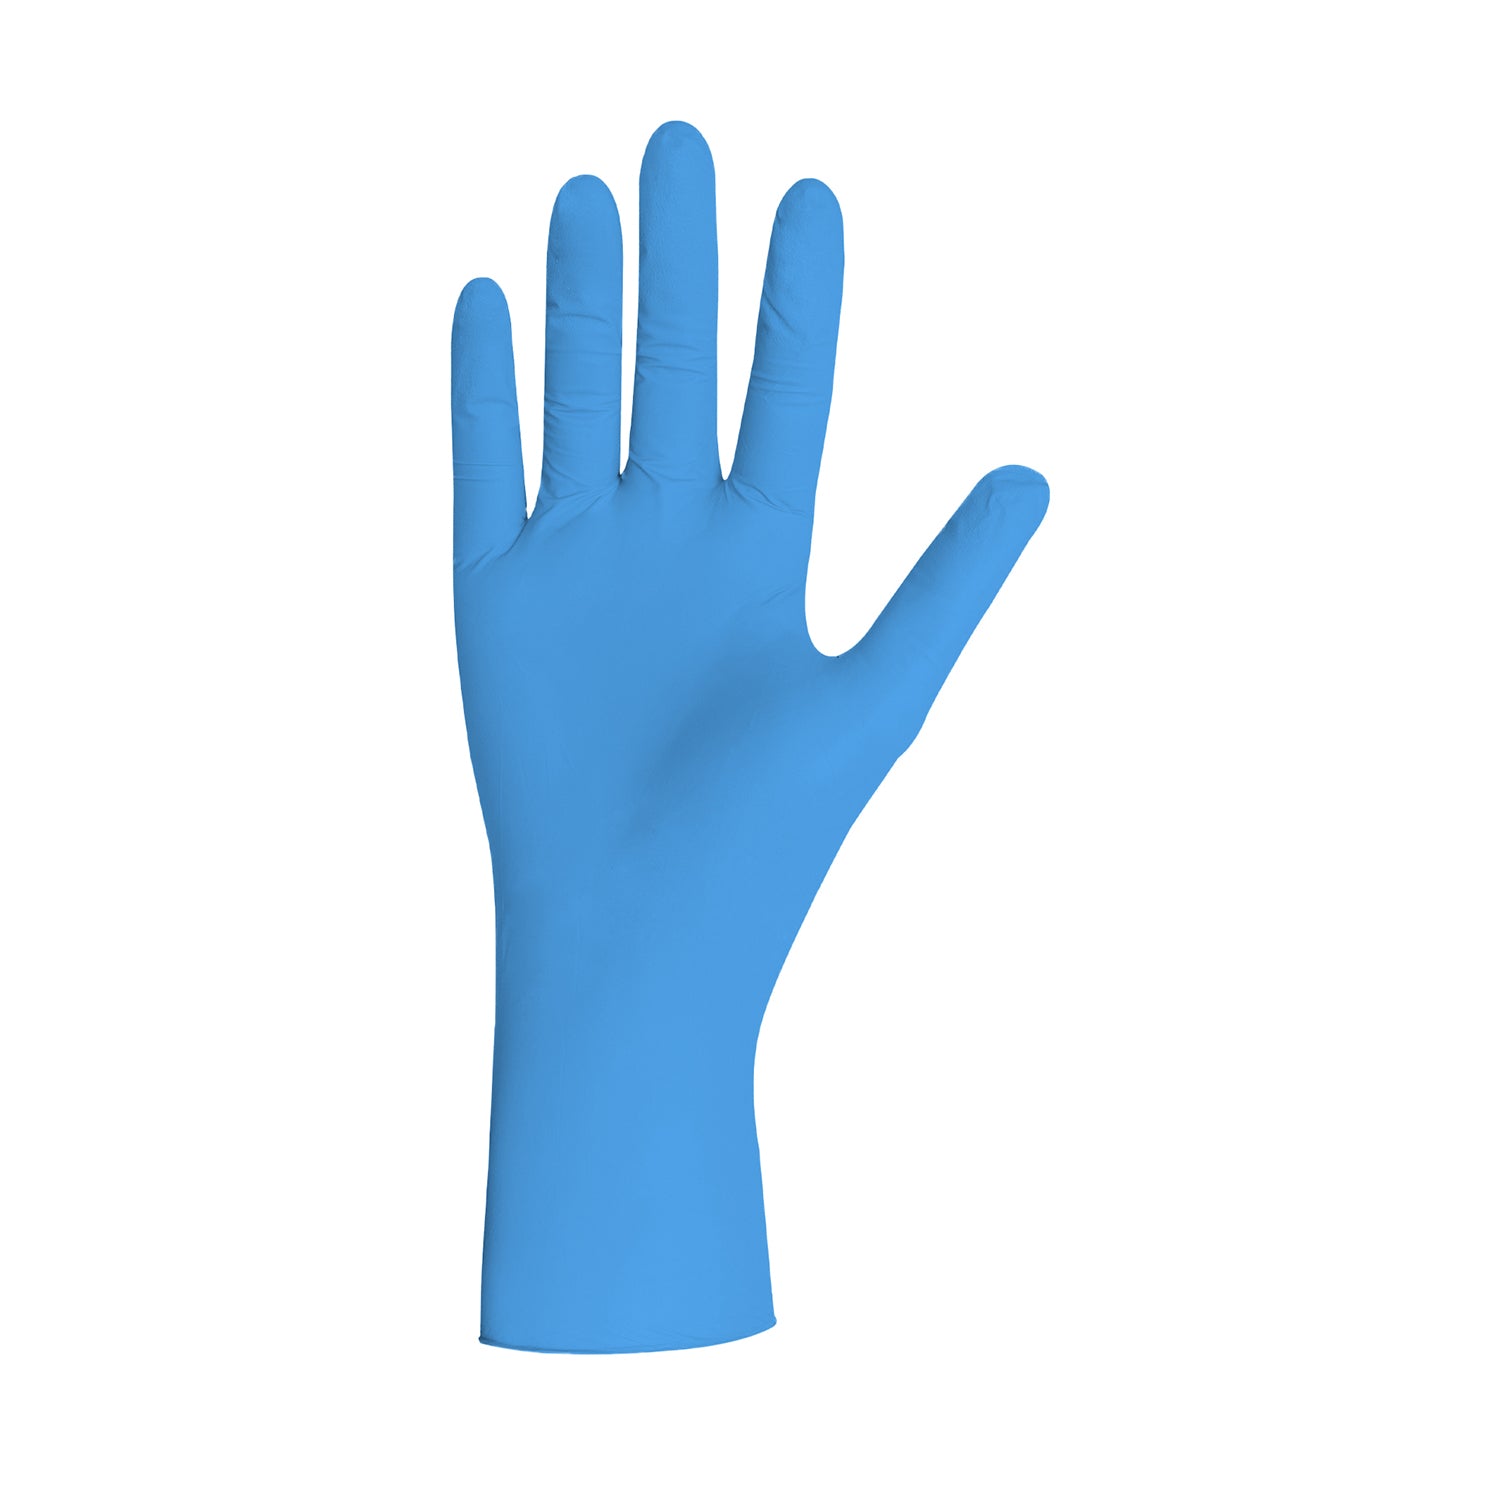 Premier AF Nitrile Examination Gloves | Sterile | Latex Free | XLarge | Pack of 50 Pairs | Short Expiry Date (3)